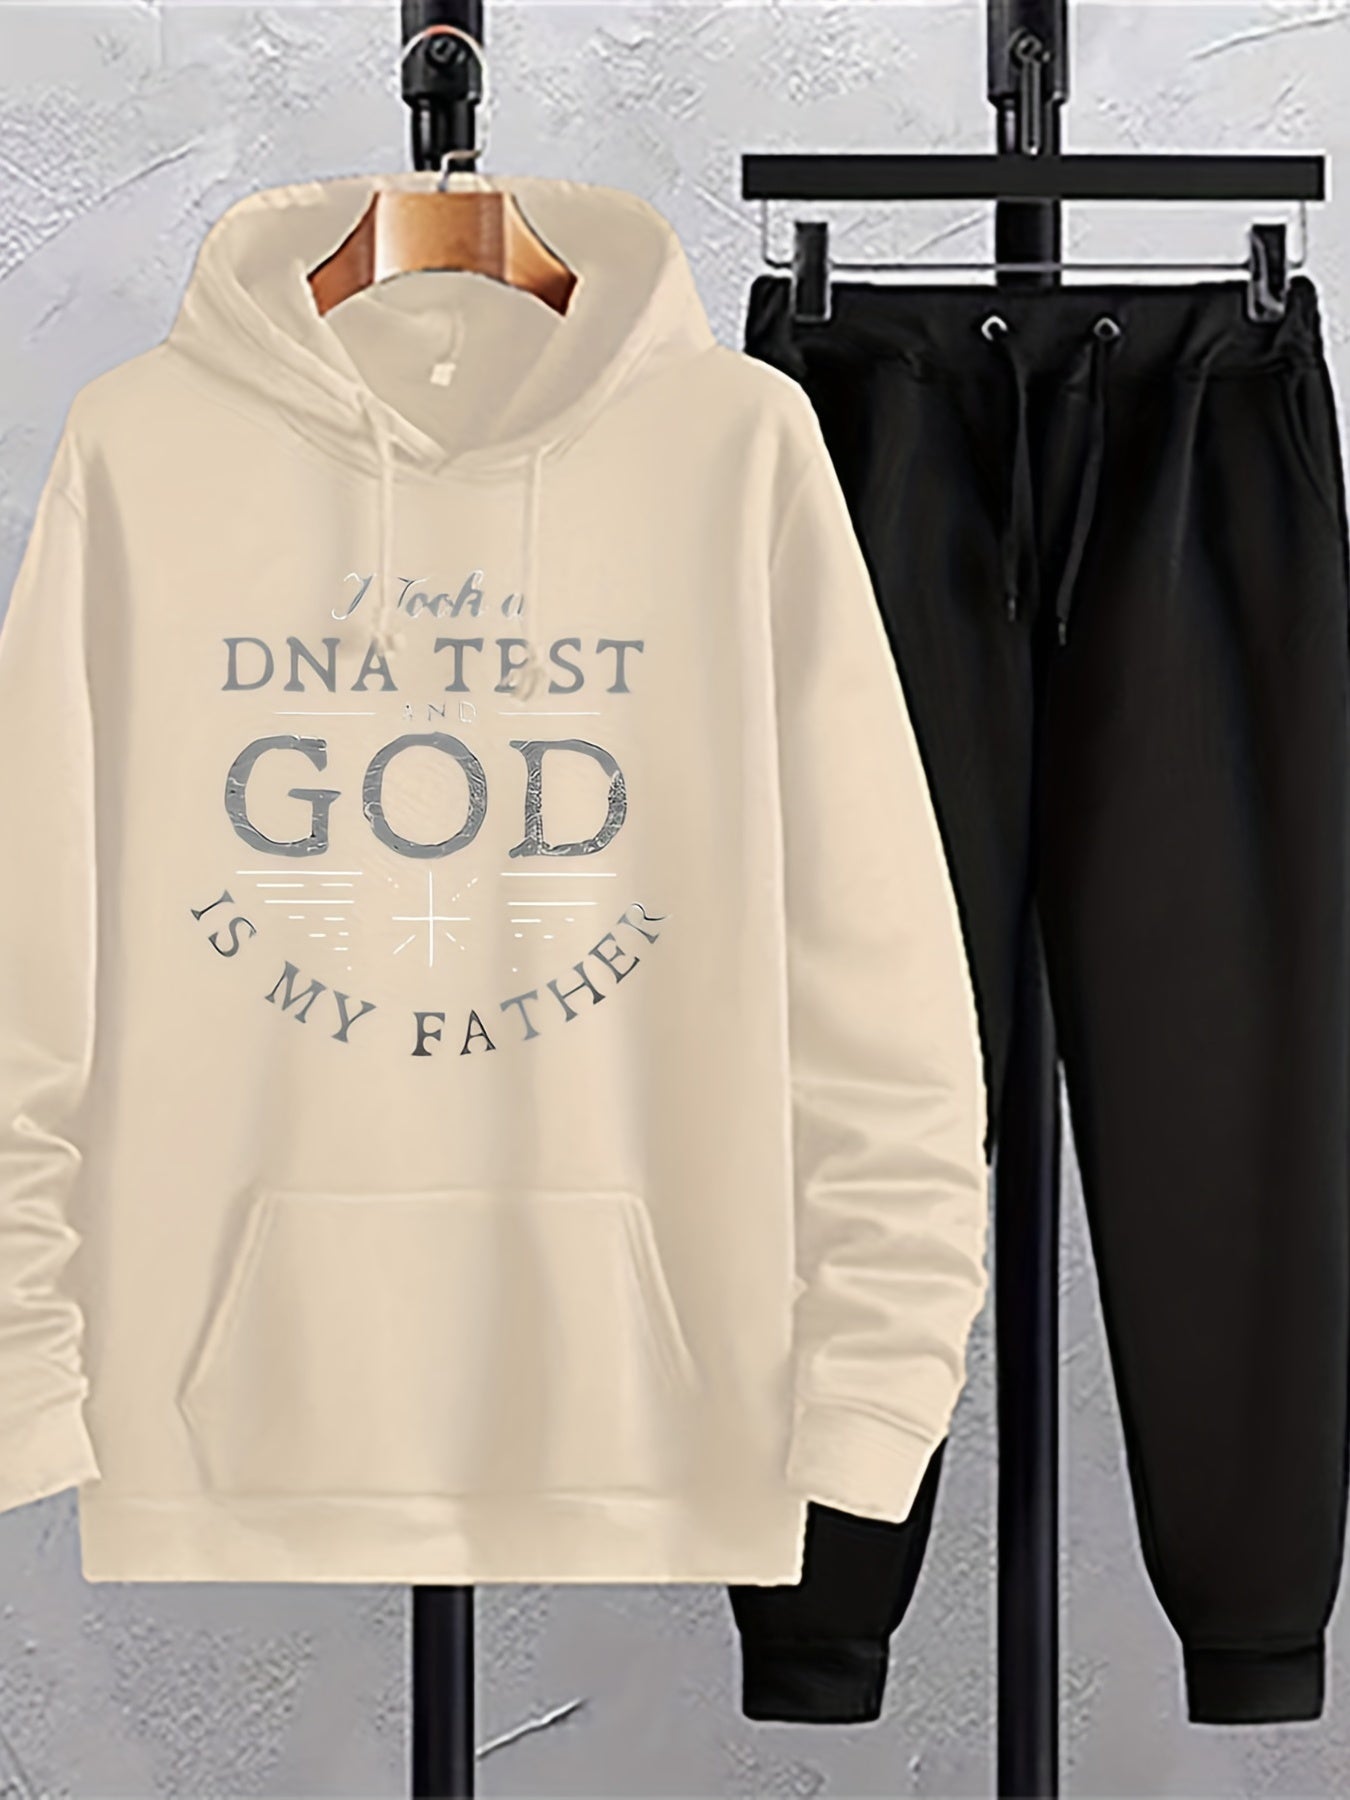 I Took A DNA Test And God Is My Father Men's Christian Casual Outfit claimedbygoddesigns